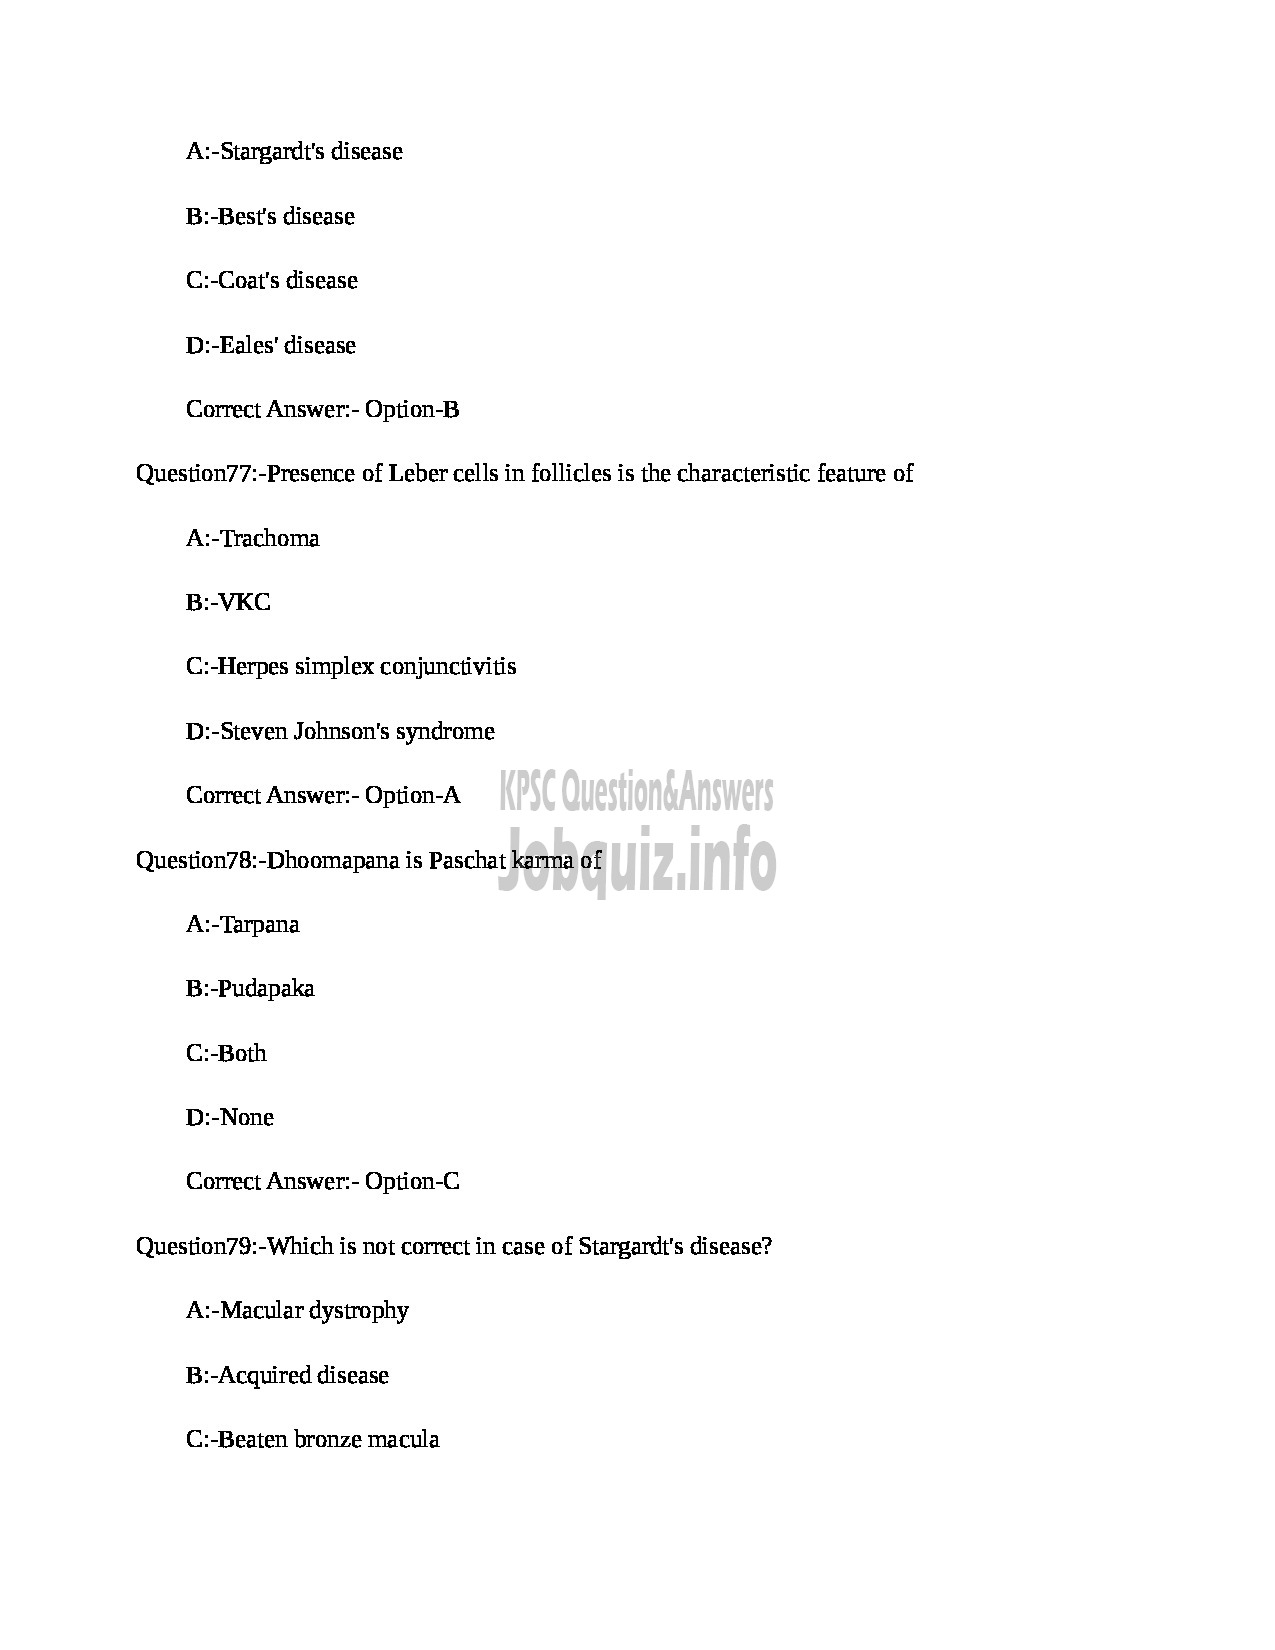 Kerala PSC Question Paper - MEDICAL OFFICER (NETRA) INDIAN SYSTEMS OF MEDICINE-23